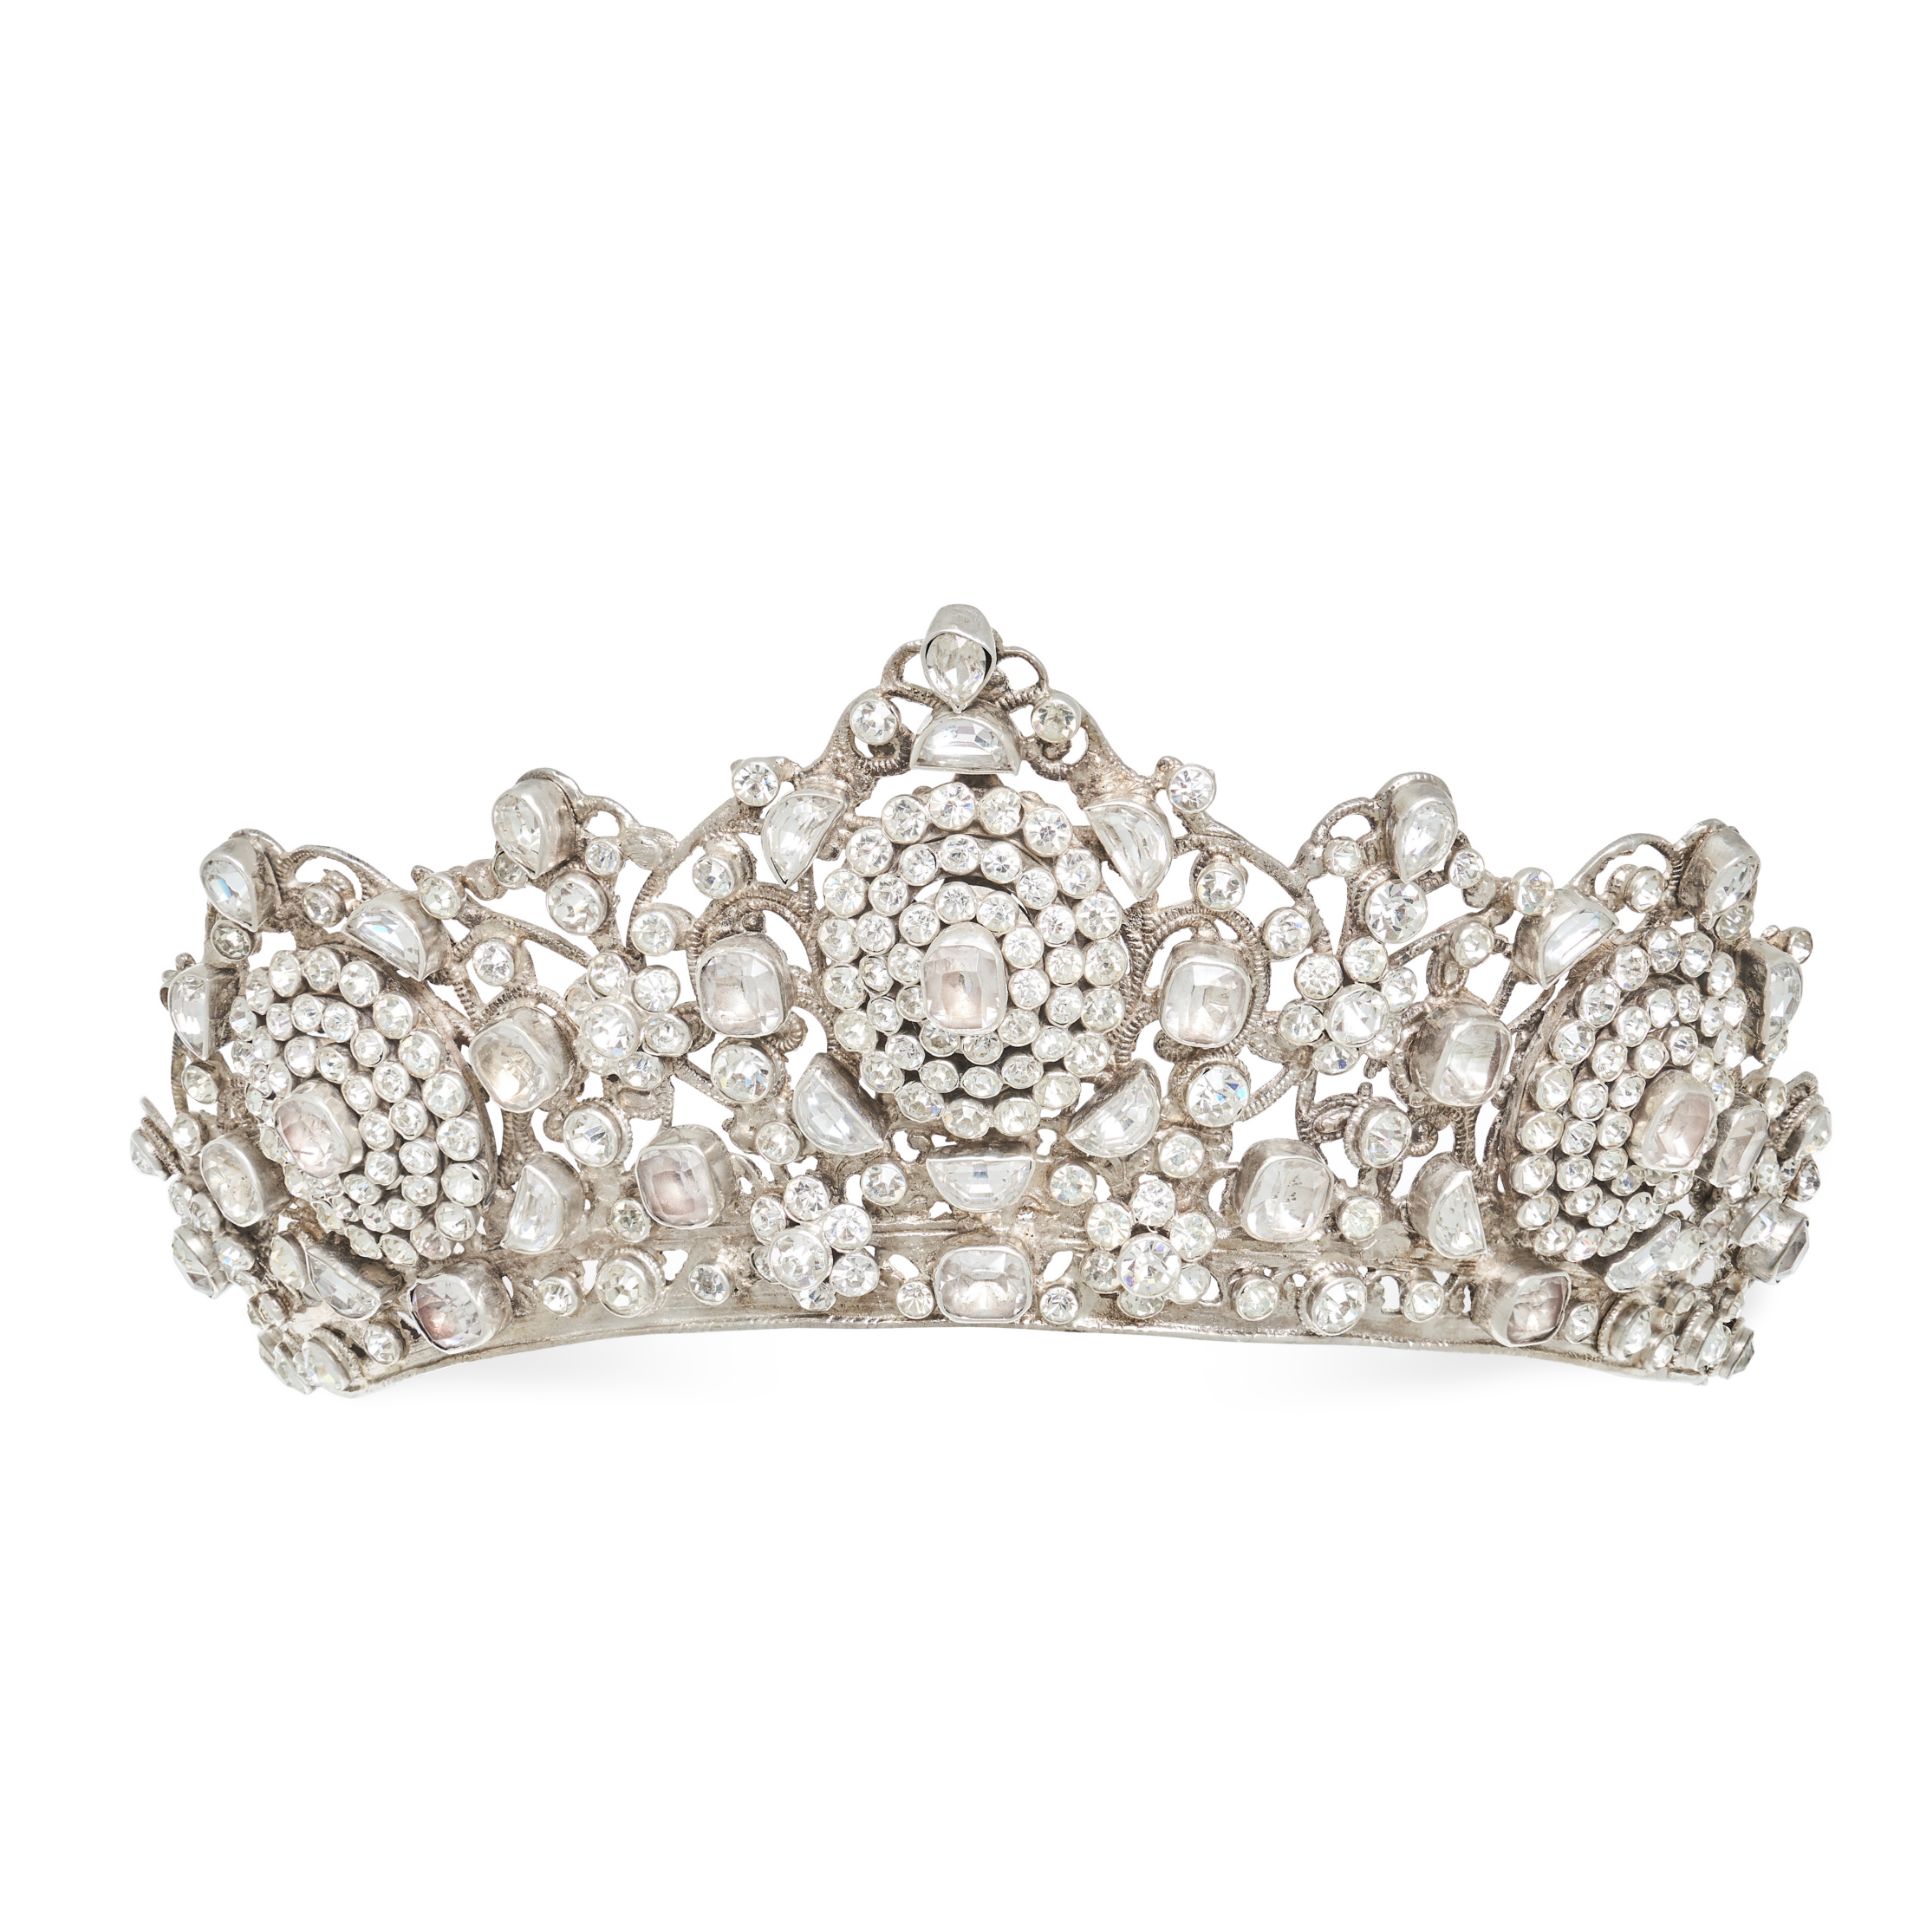 A PASTE TIARA set with clusters of paste stones, accented throughout with round, cushion, and hal...